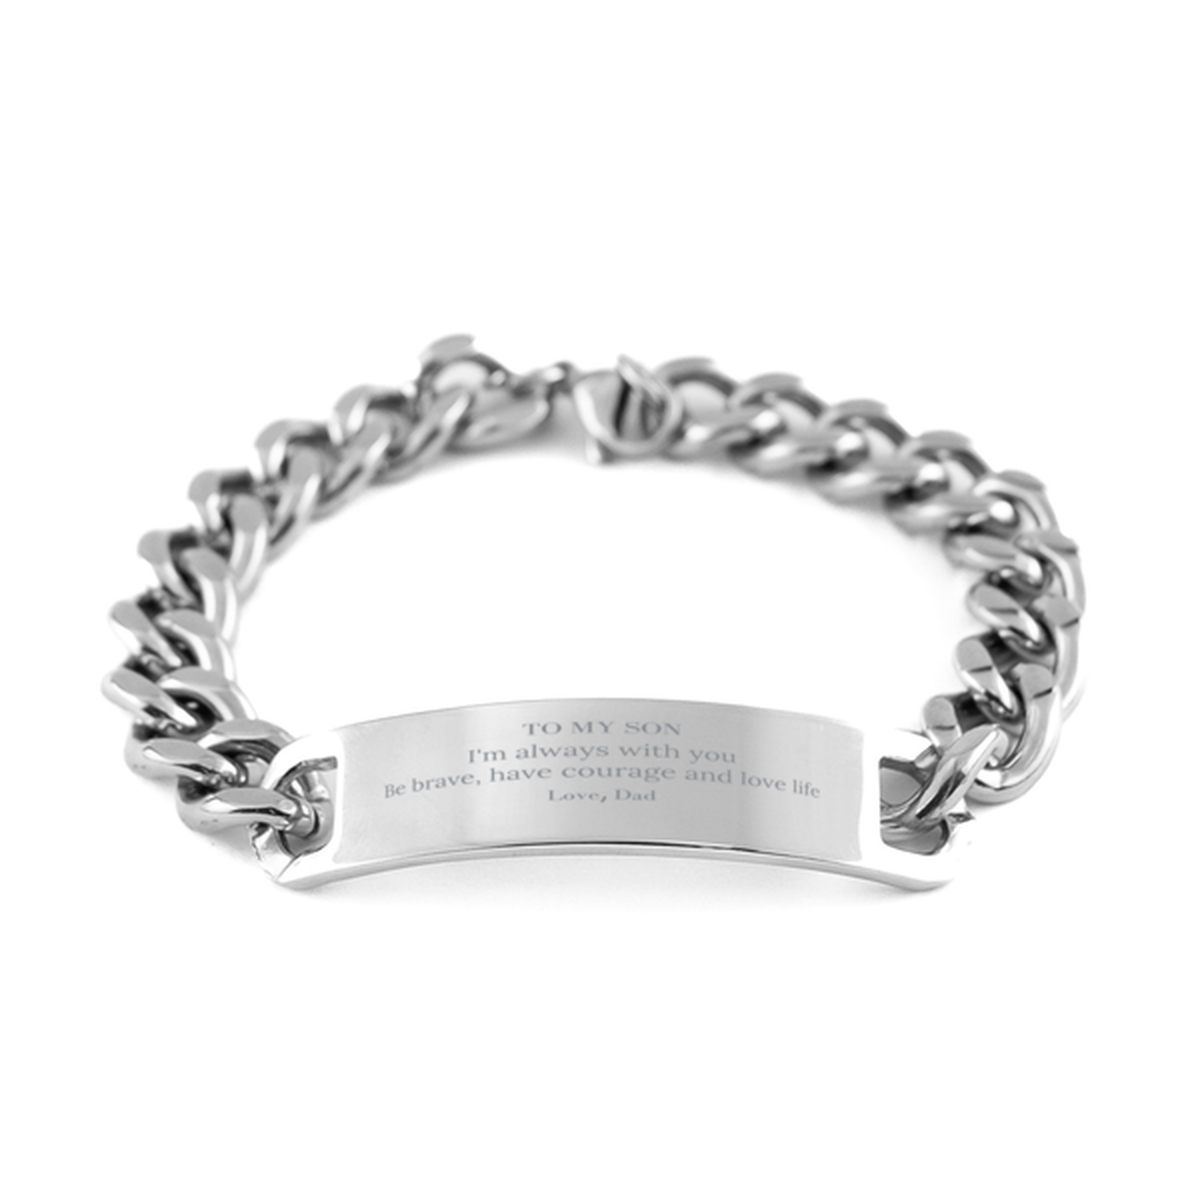 To My Son Gifts from Dad, Unique Cuban Chain Stainless Steel Bracelet Inspirational Christmas Birthday Graduation Gifts for Son I'm always with you. Be brave, have courage and love life. Love, Dad